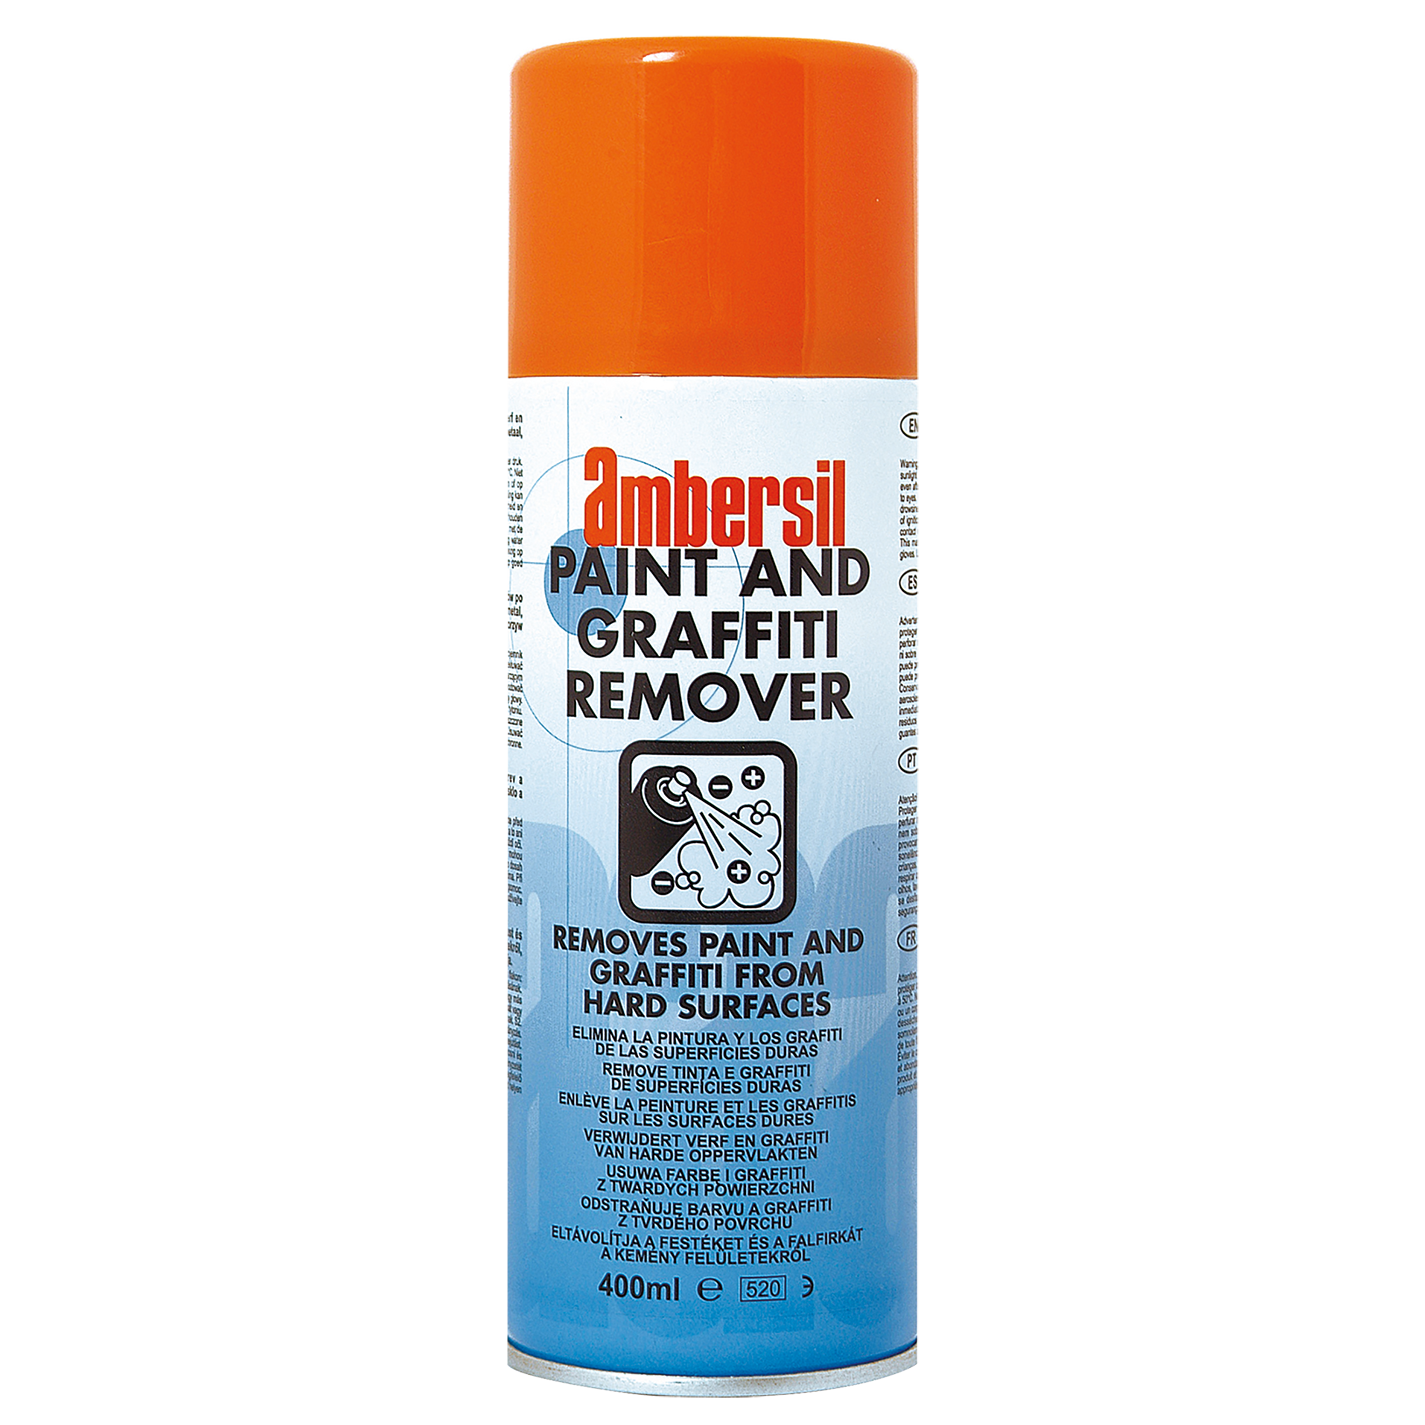 PAINT AND GRAFFITI REMOVER